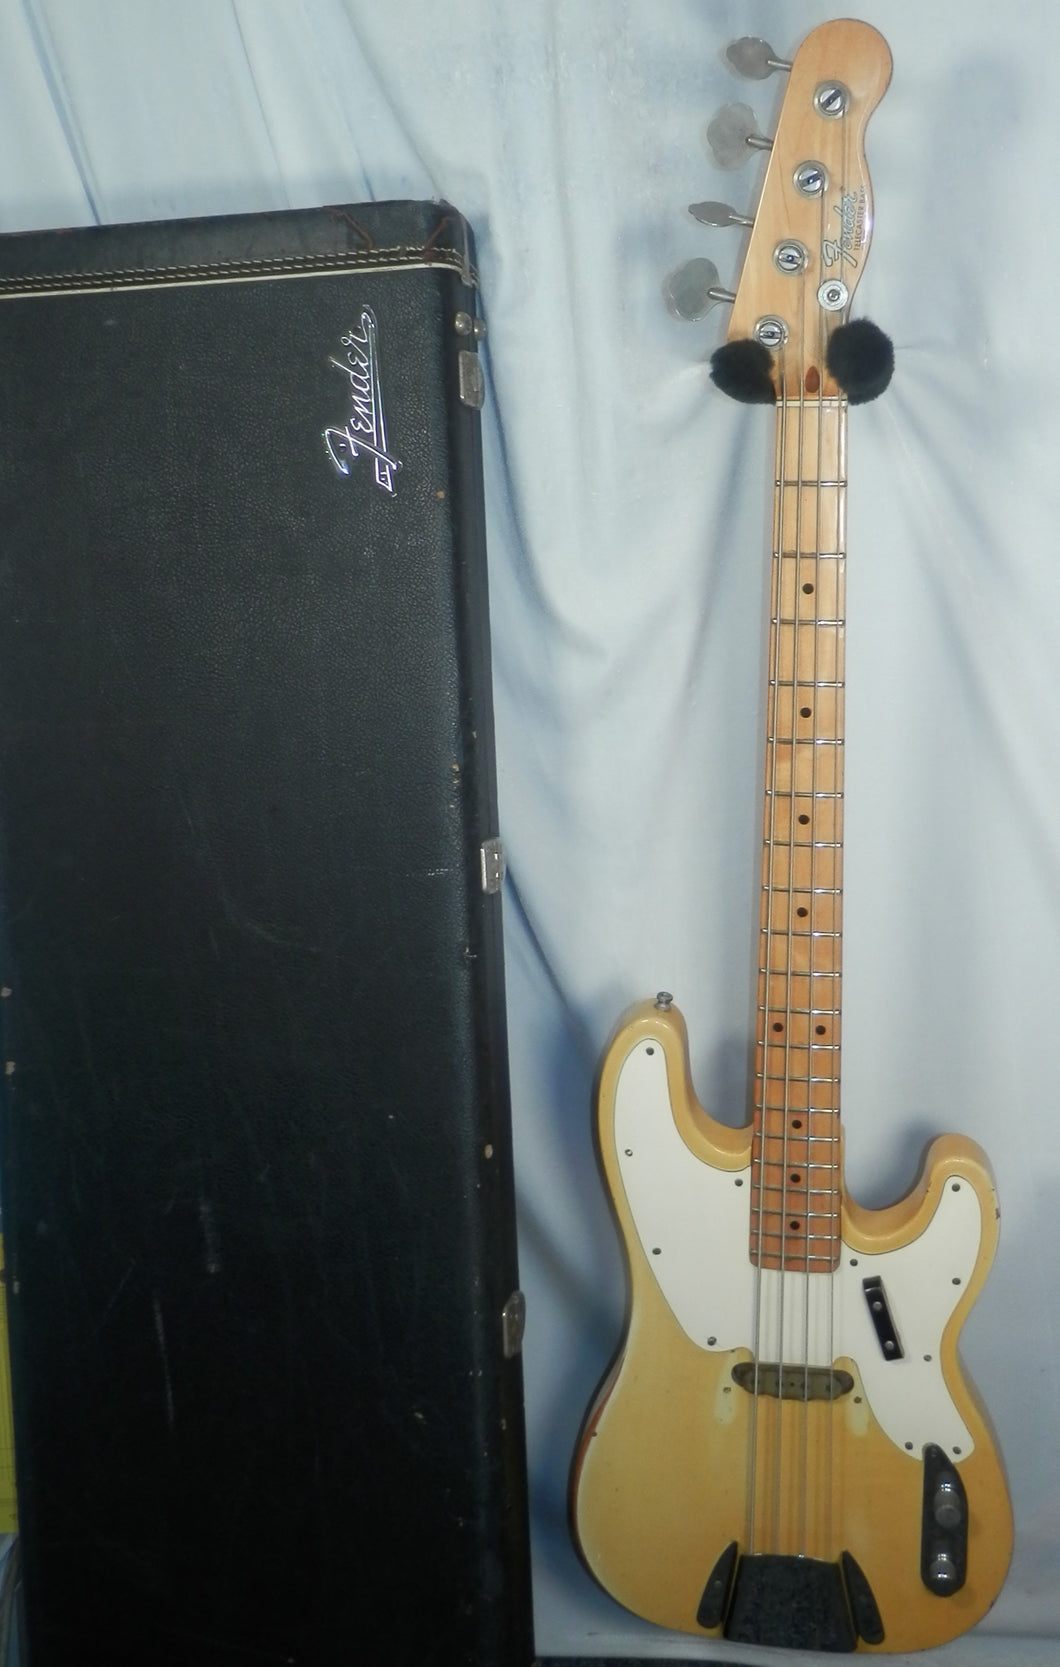 Fender Telecaster Bass Butterscotch Blonde with original case vintage 1968-69 Tele Bass used